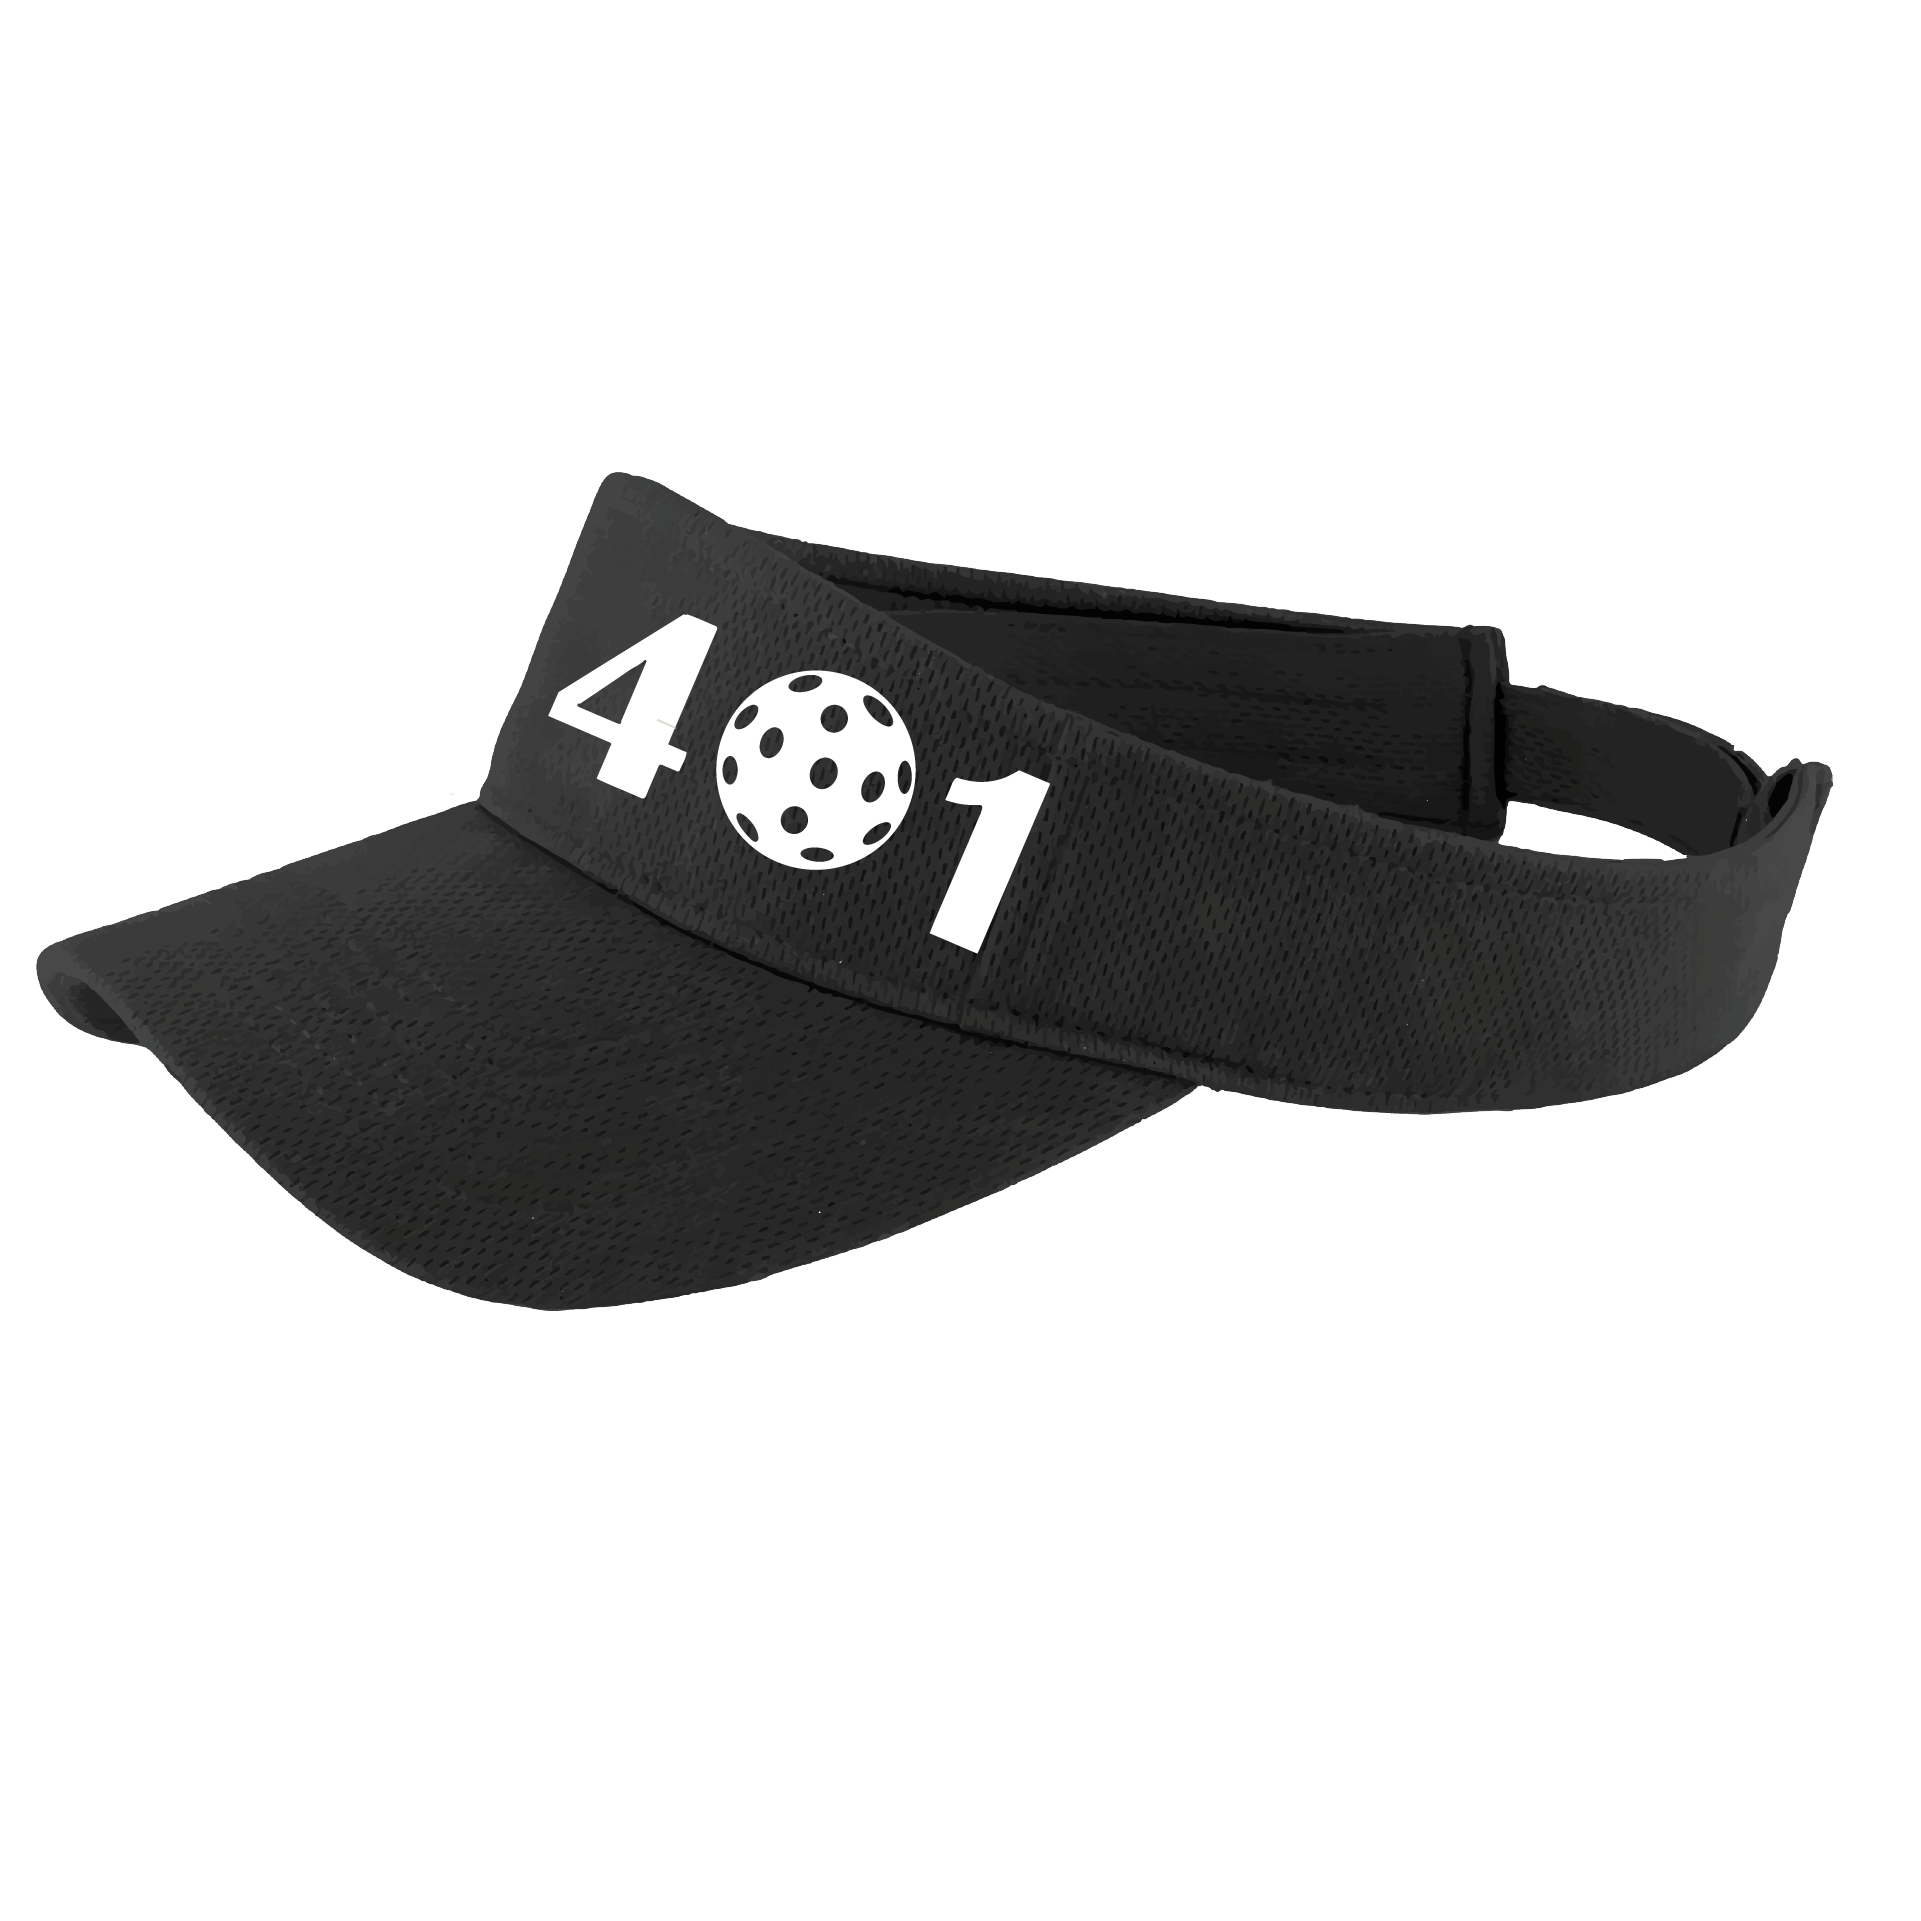 Design: 401 Rhode Island Pickleball Club  This fun pickleball visor is the perfect accessory for all pickleball players needing to keep their focus on the game and not the sun. The moisture-wicking material is made of 100% polyester with closed-hole flat back mesh and PosiCharge Technology. The back closure is a hook and loop style made to adjust to every adult.